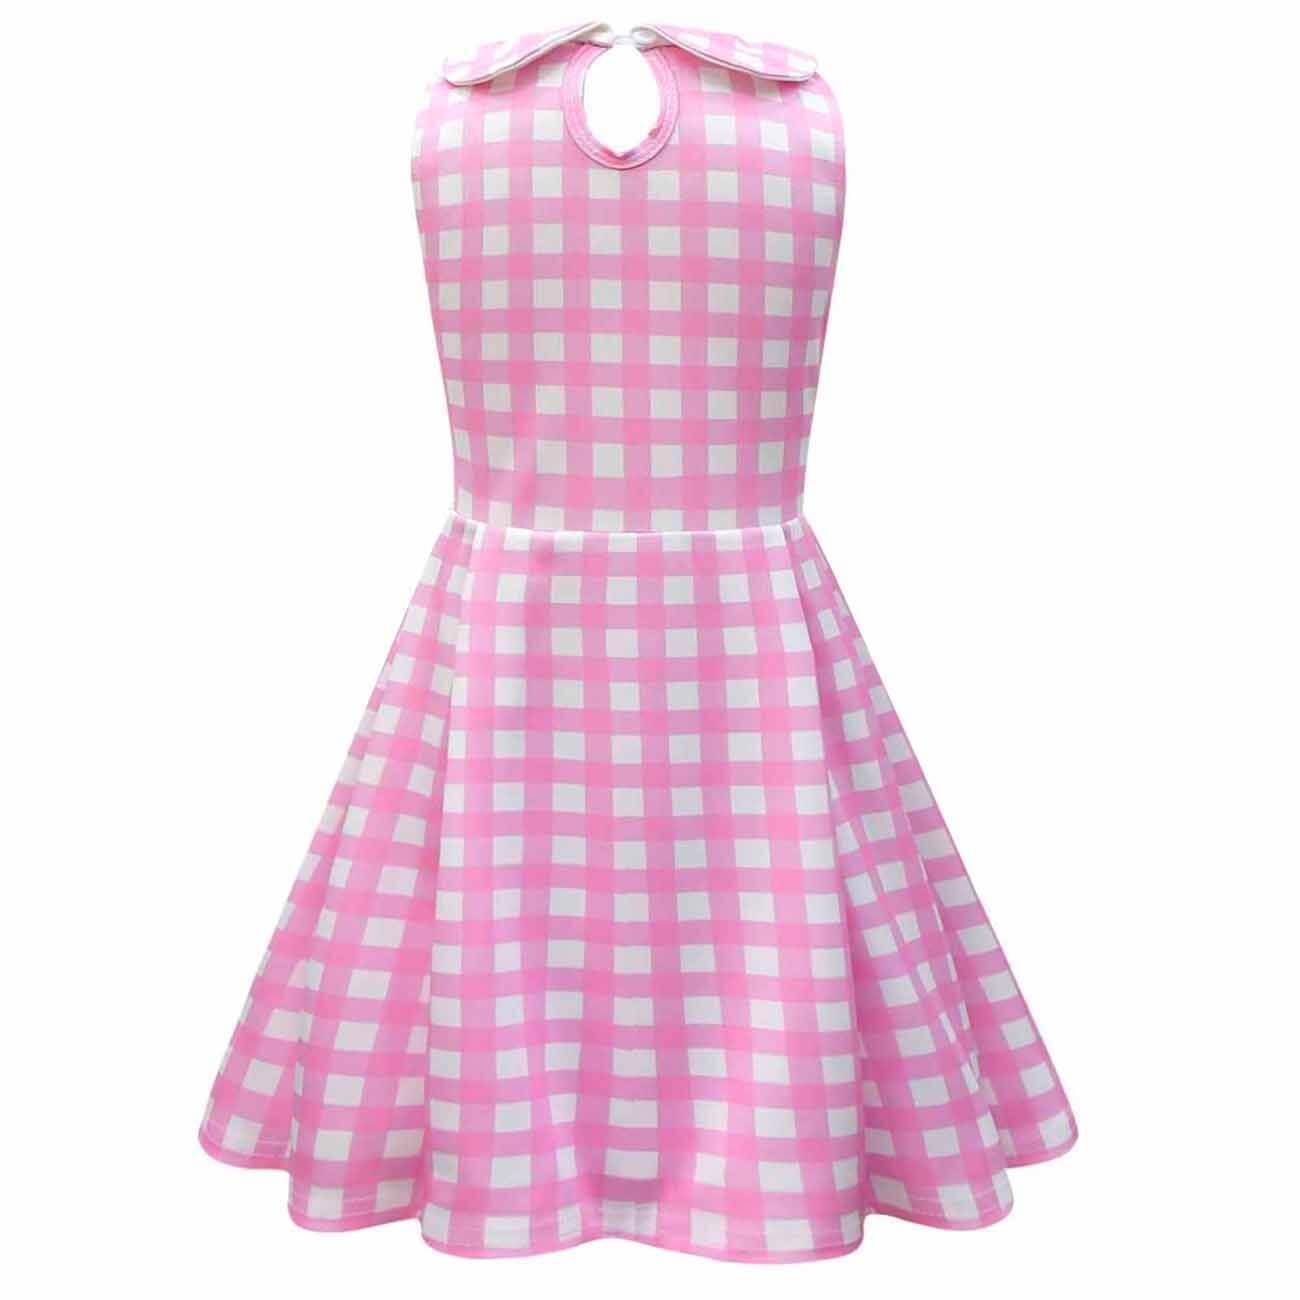 Kids Pink Plaid Dress Sleeveless Party Outfit with Accessories Girls Halloween Cosplay Costume